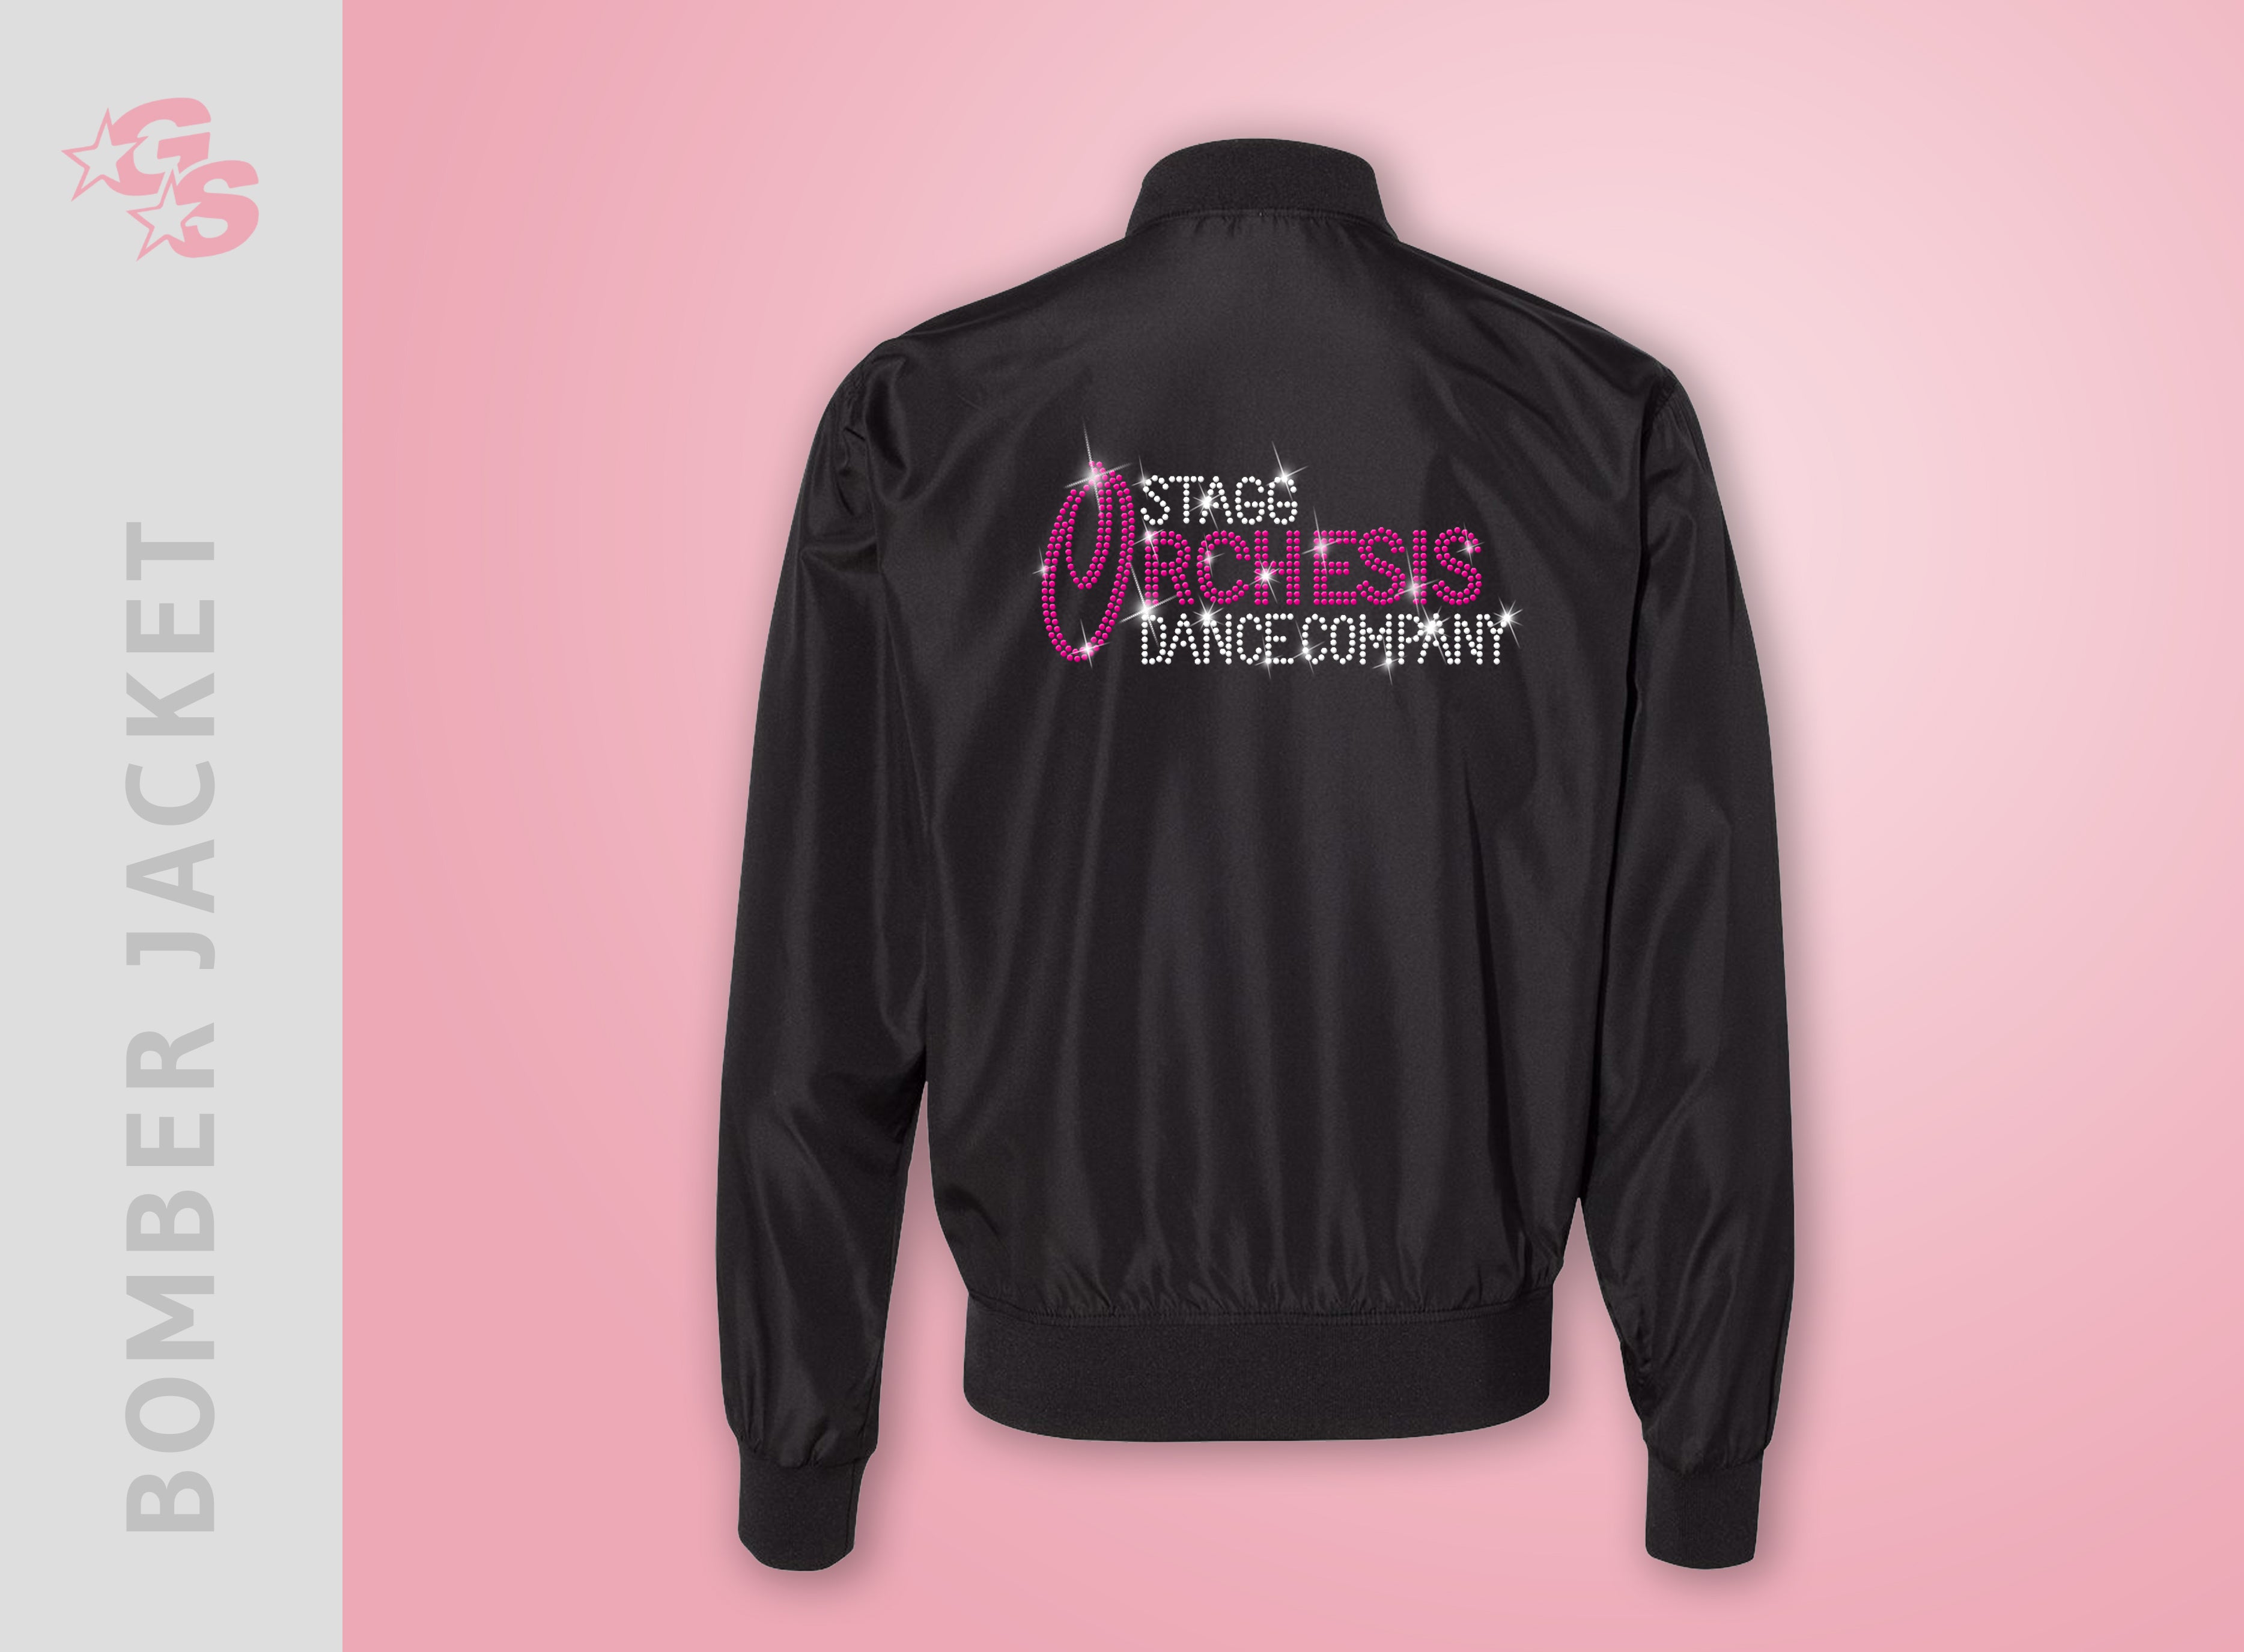 Stagg Orchesis Dance Company Bomber Jacket